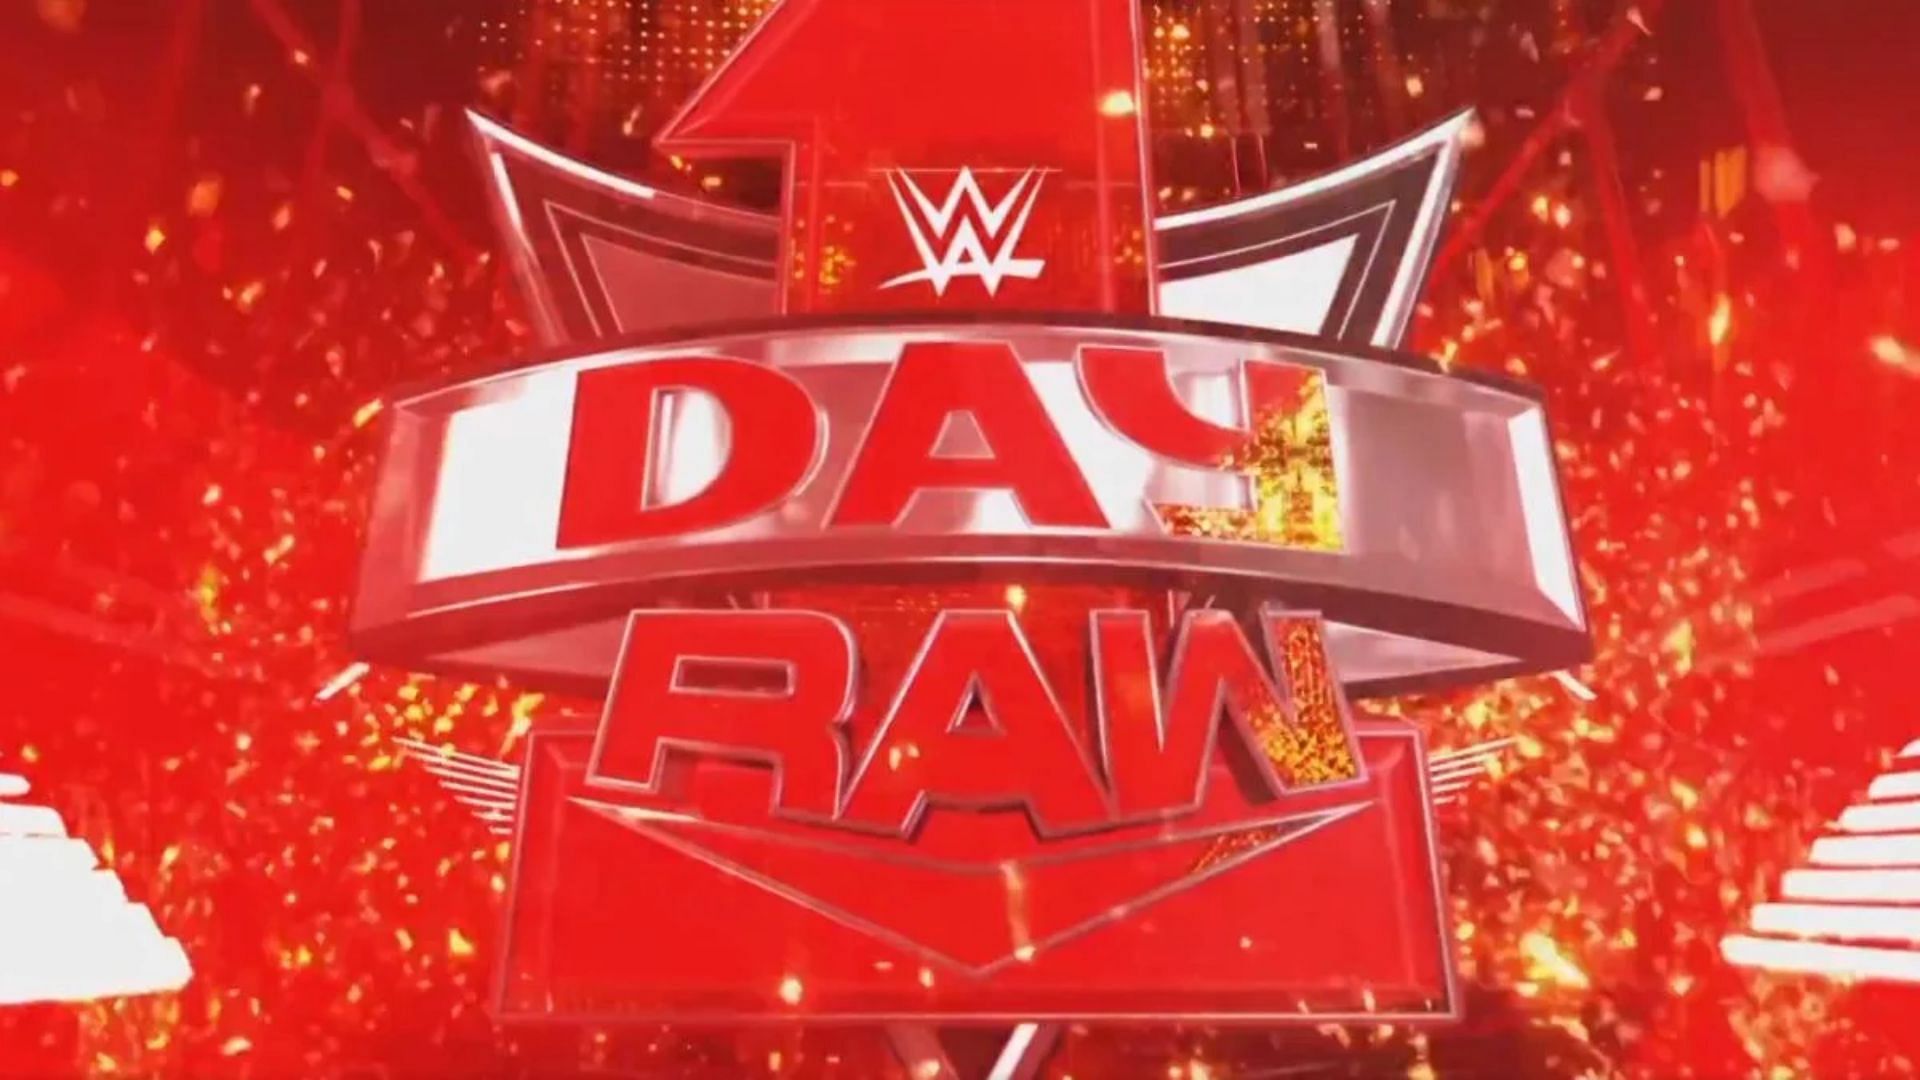 RAW: Day 1 is going to be an explosive show